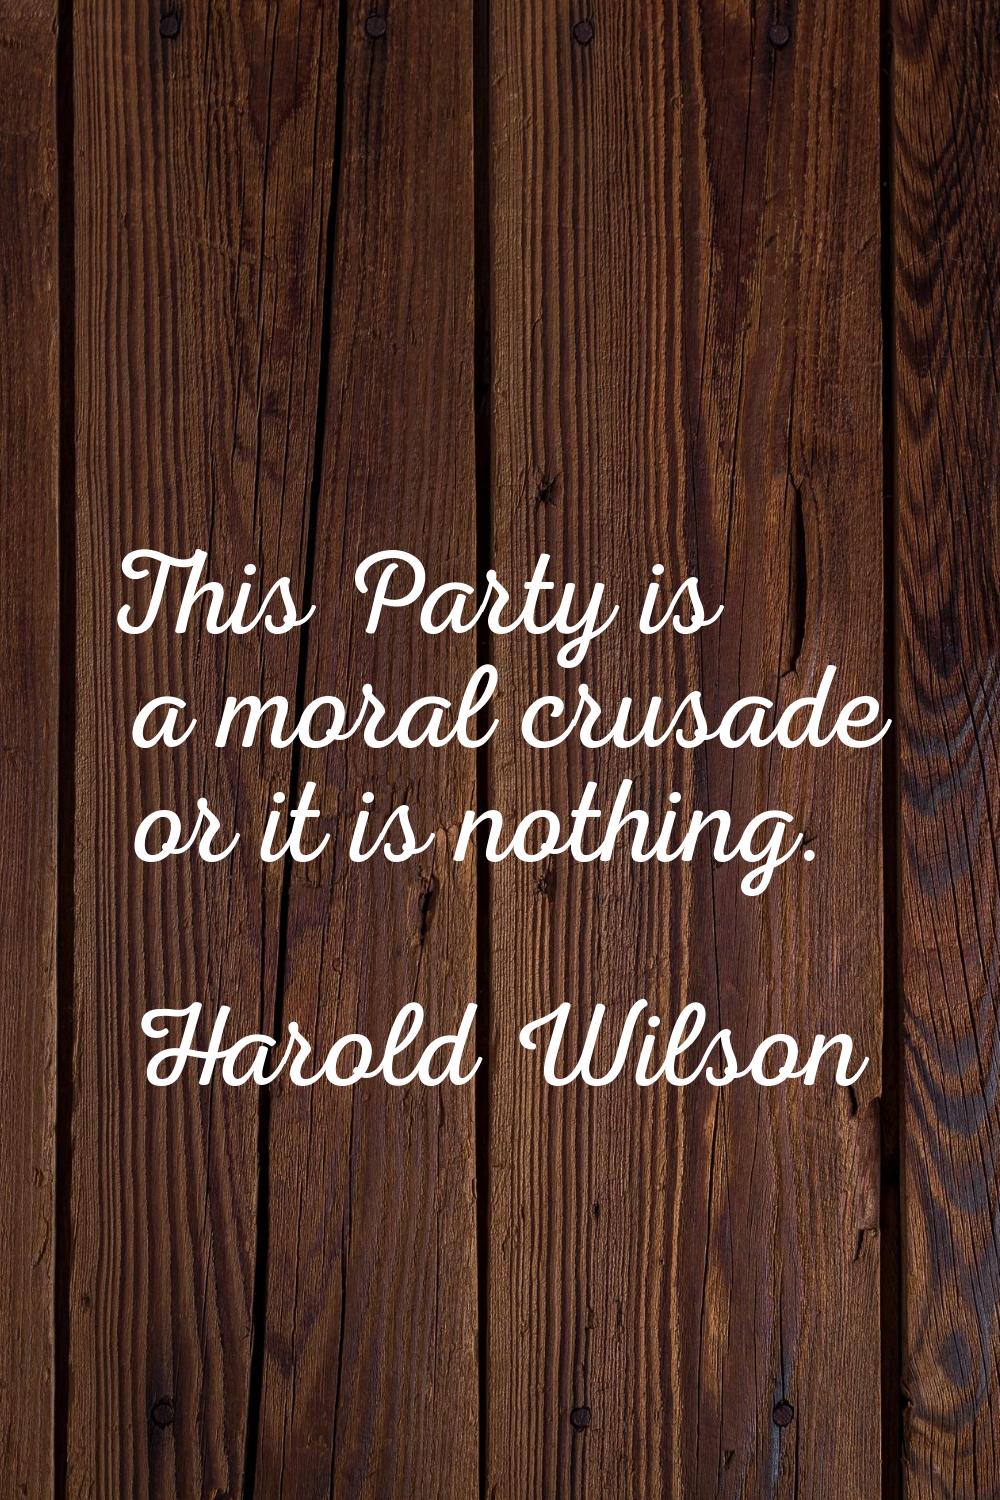 This Party is a moral crusade or it is nothing.